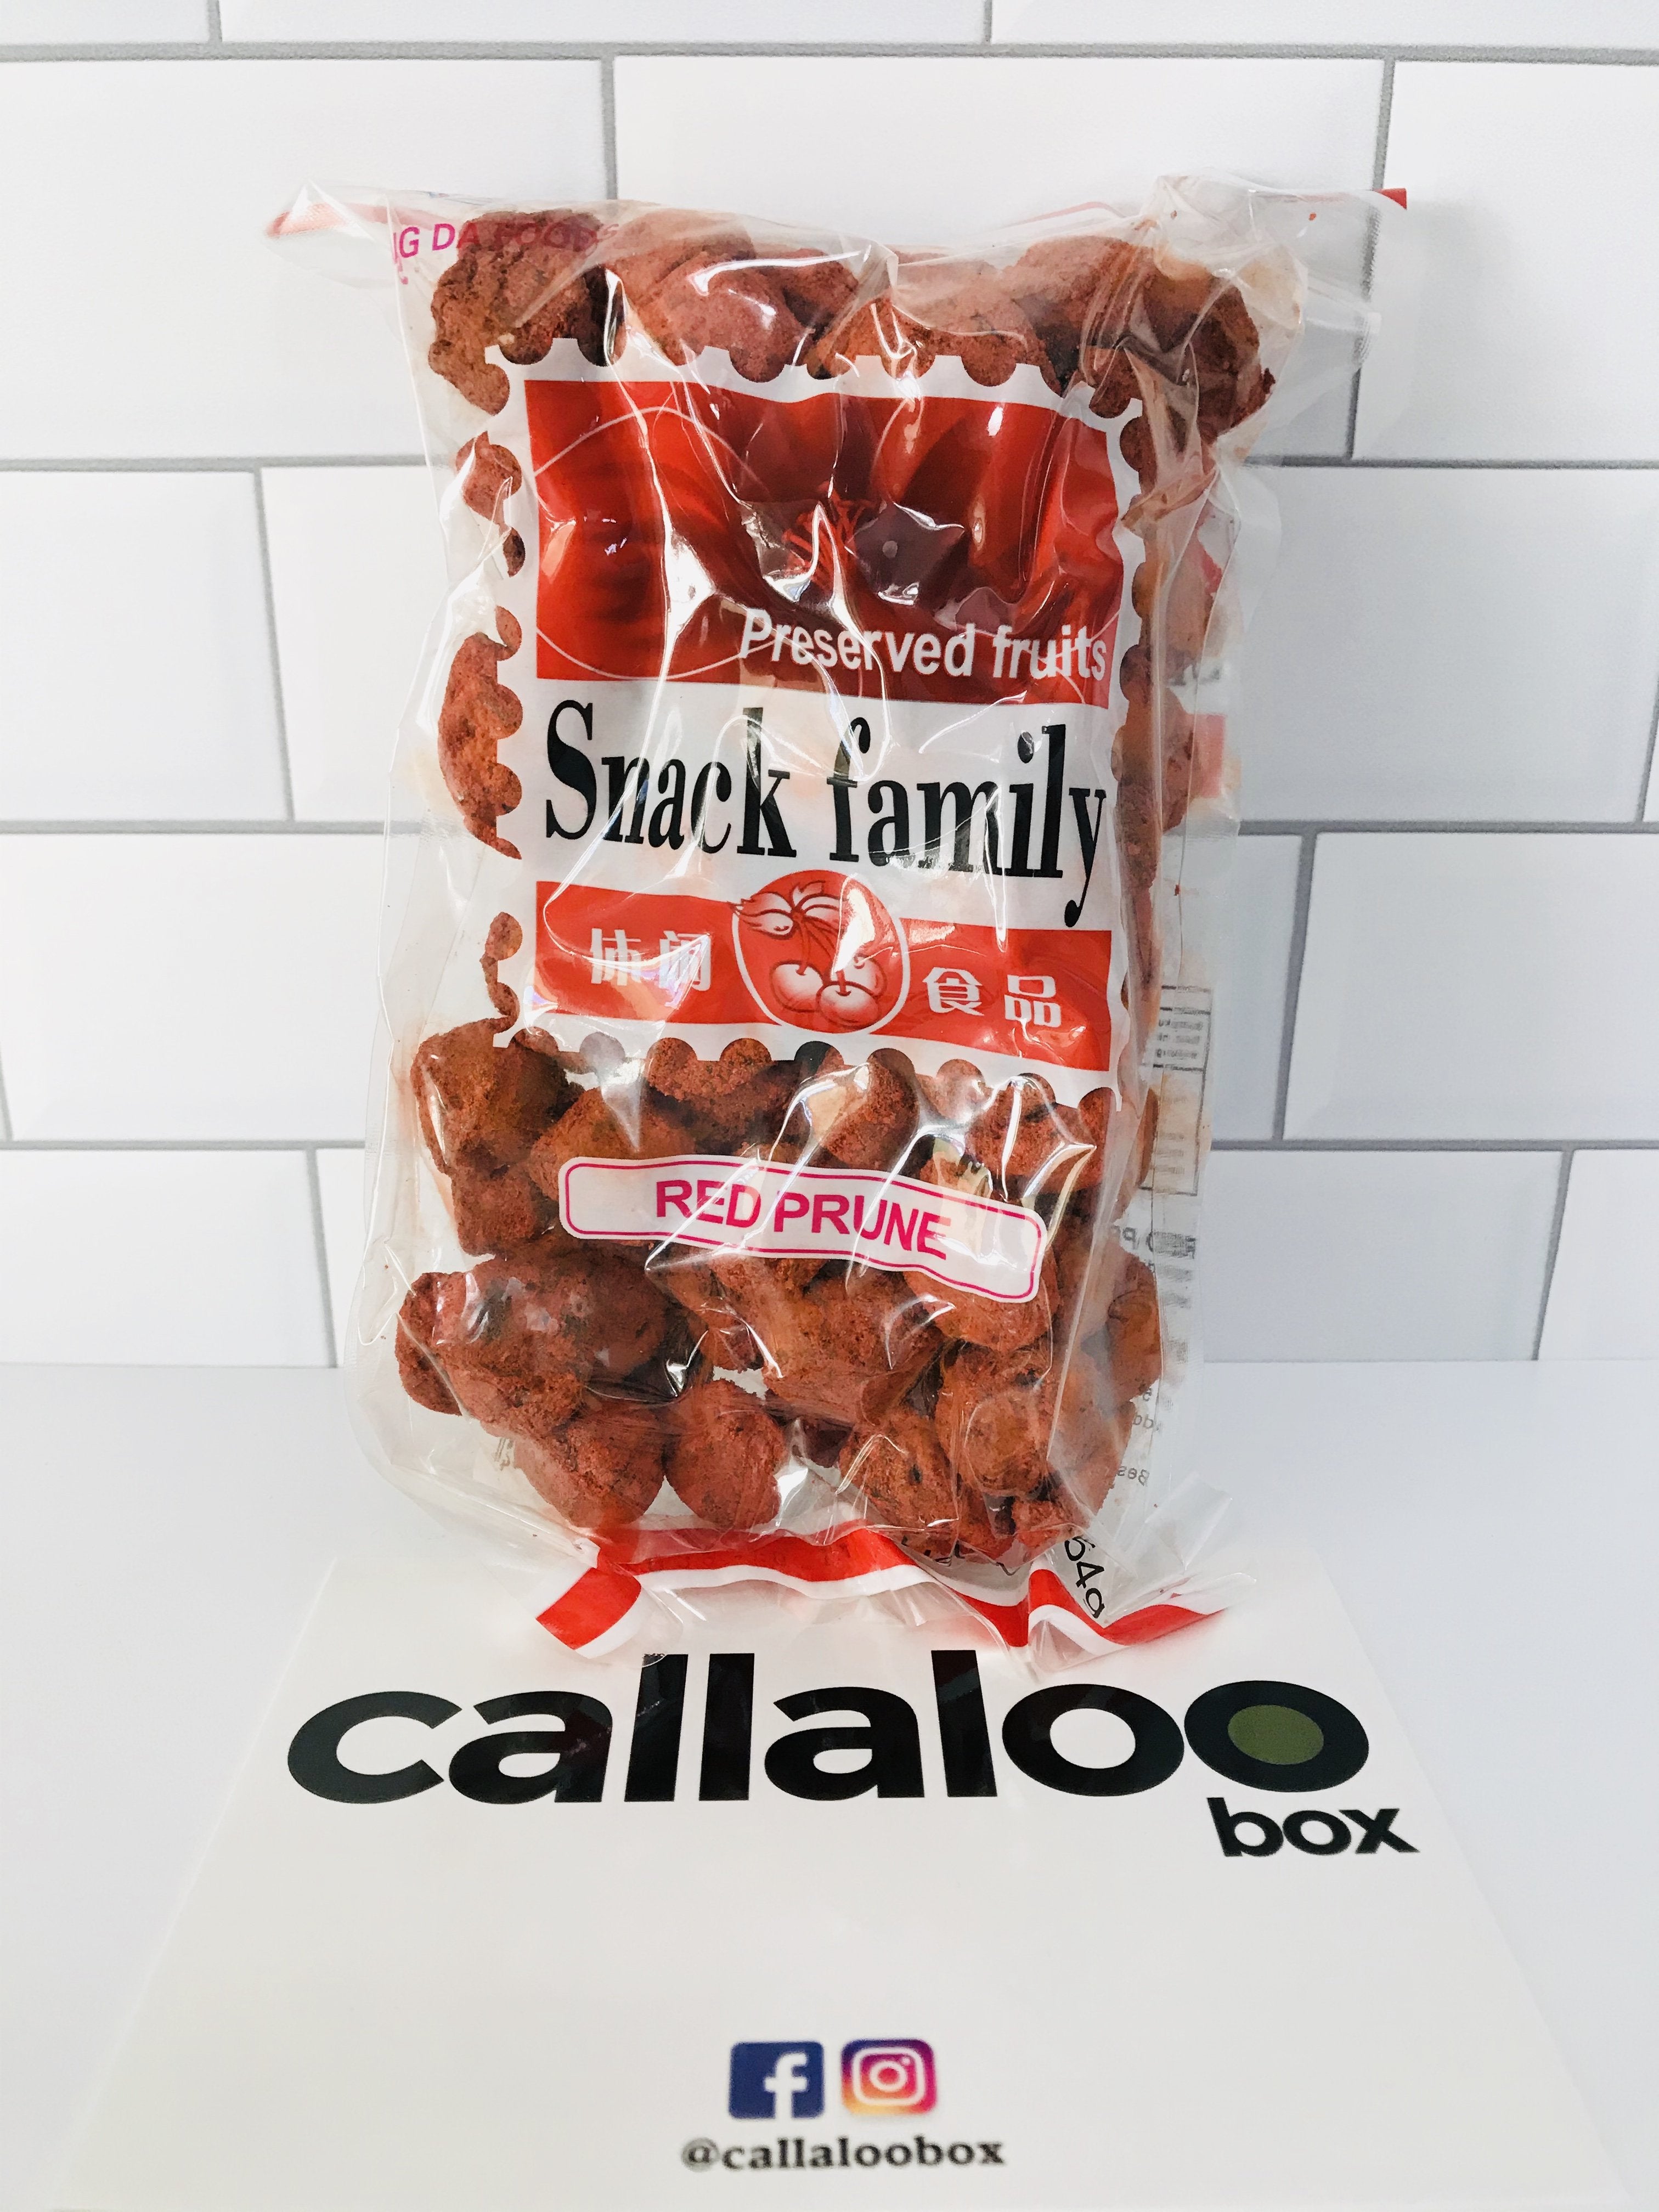 Snack Family Preserved Fruits - Red (Salt) Prune – Callaloo Box